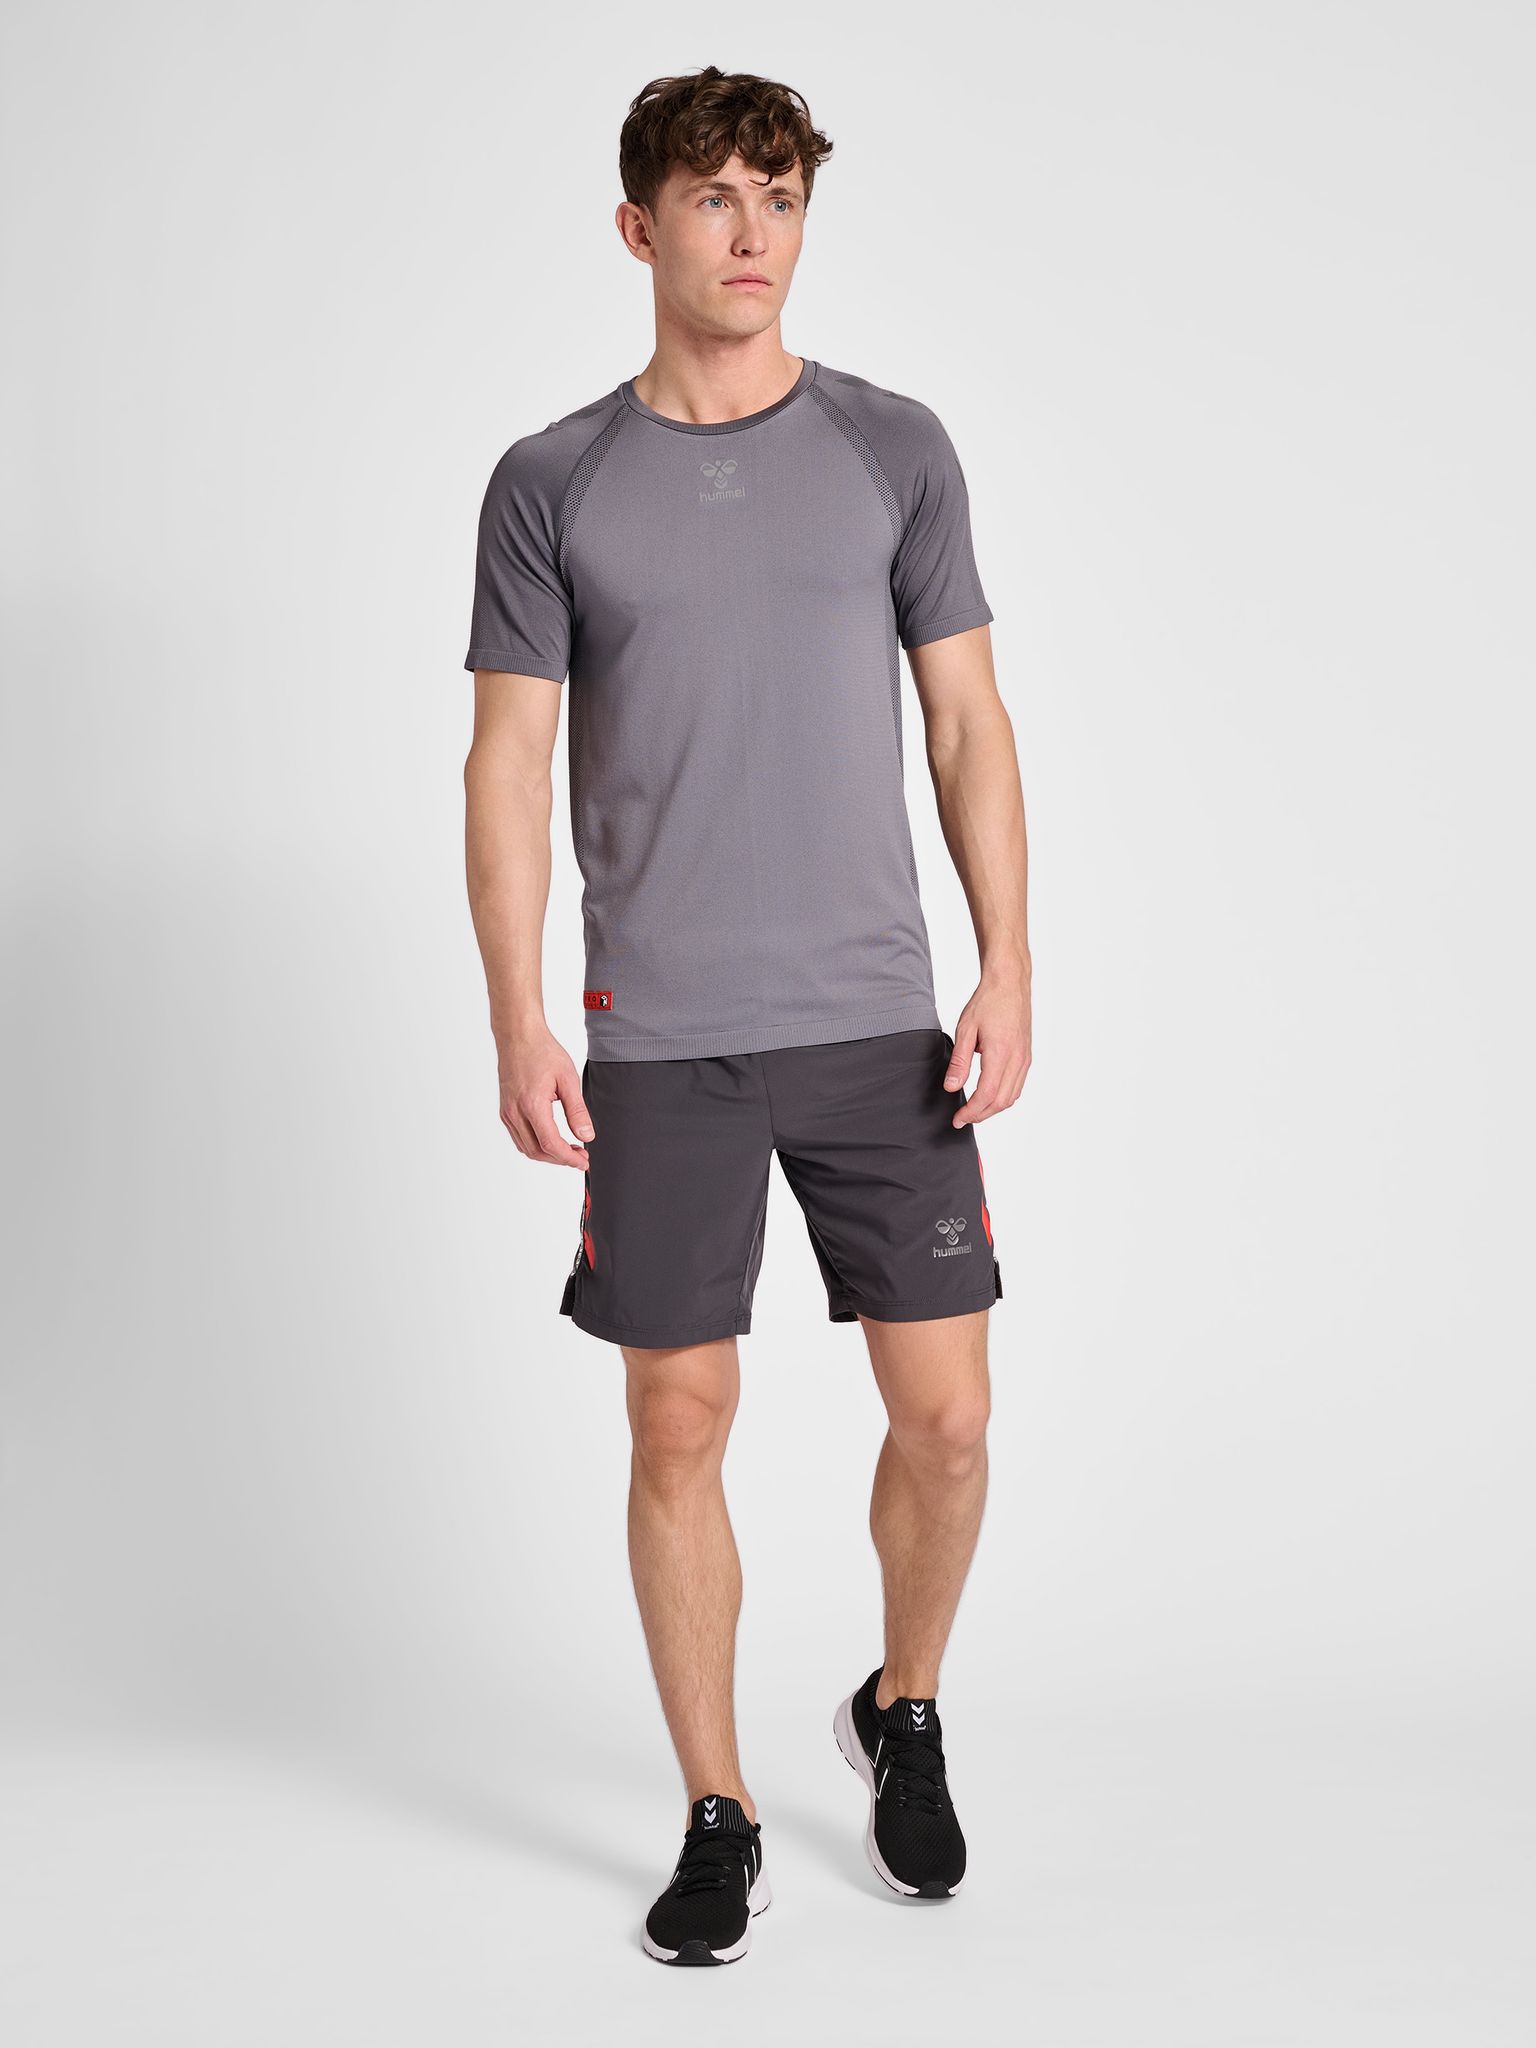 hmlPRO GRID SEAMLESS S/S